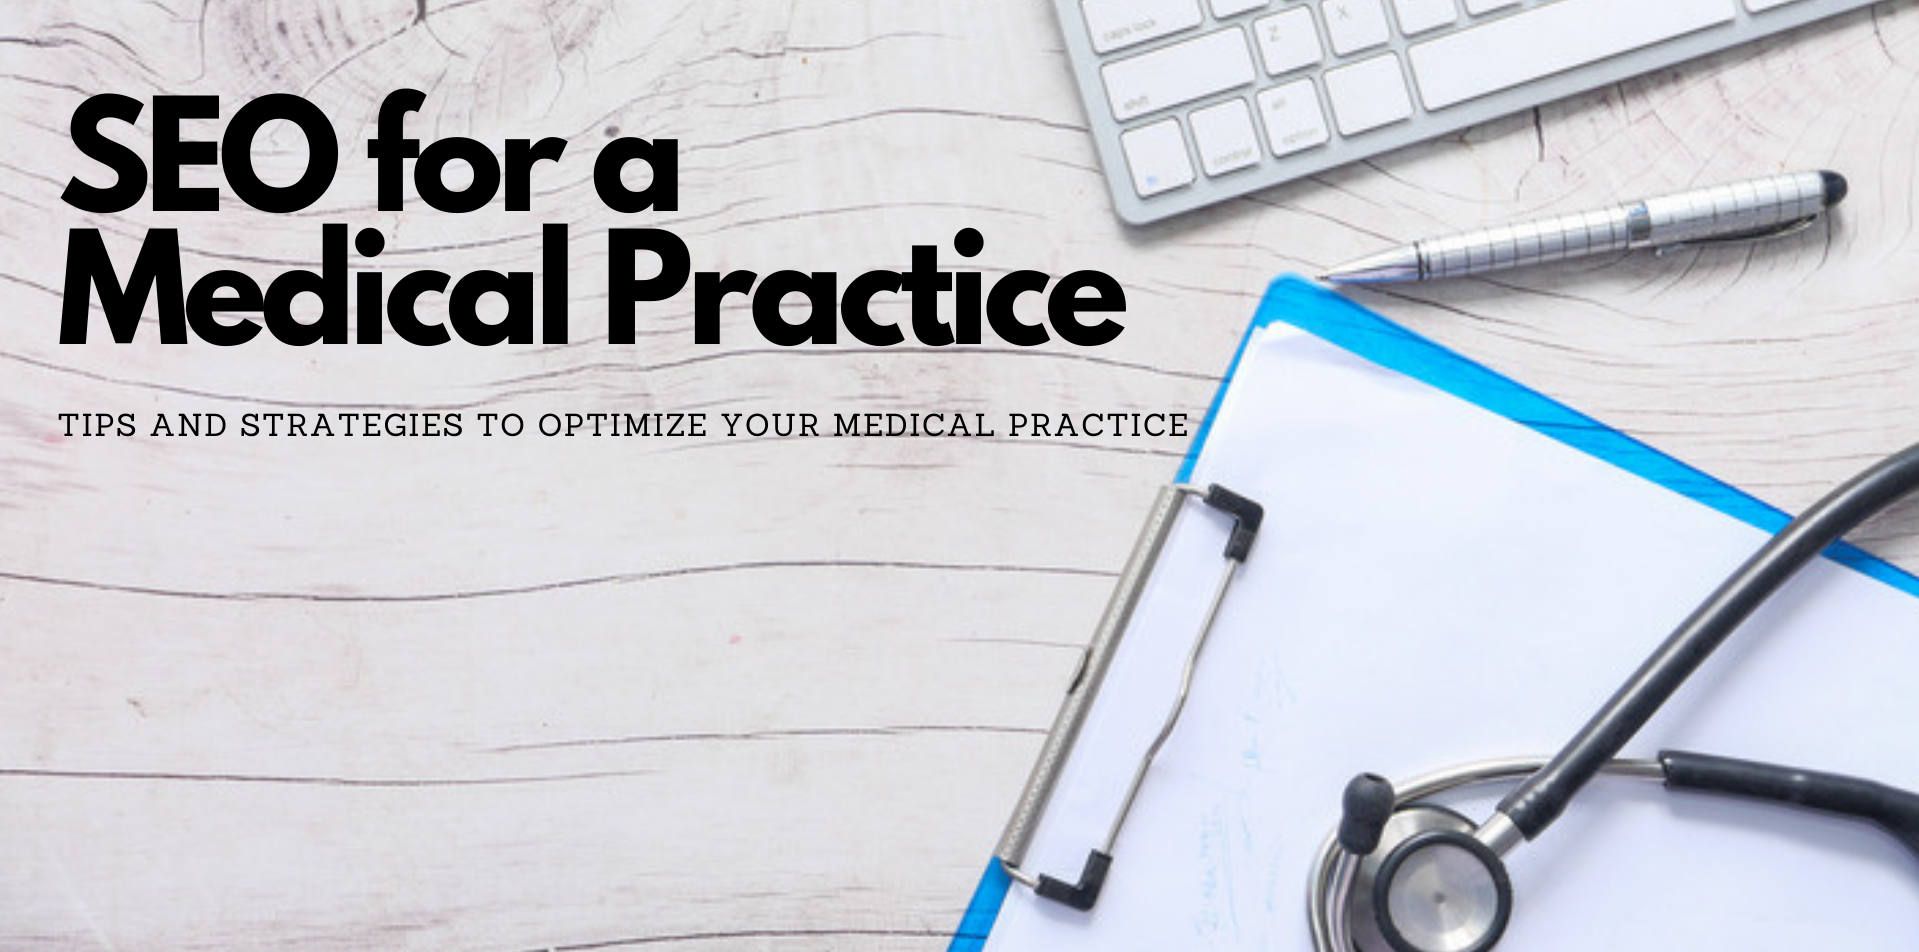 SEO for a Medical Practice